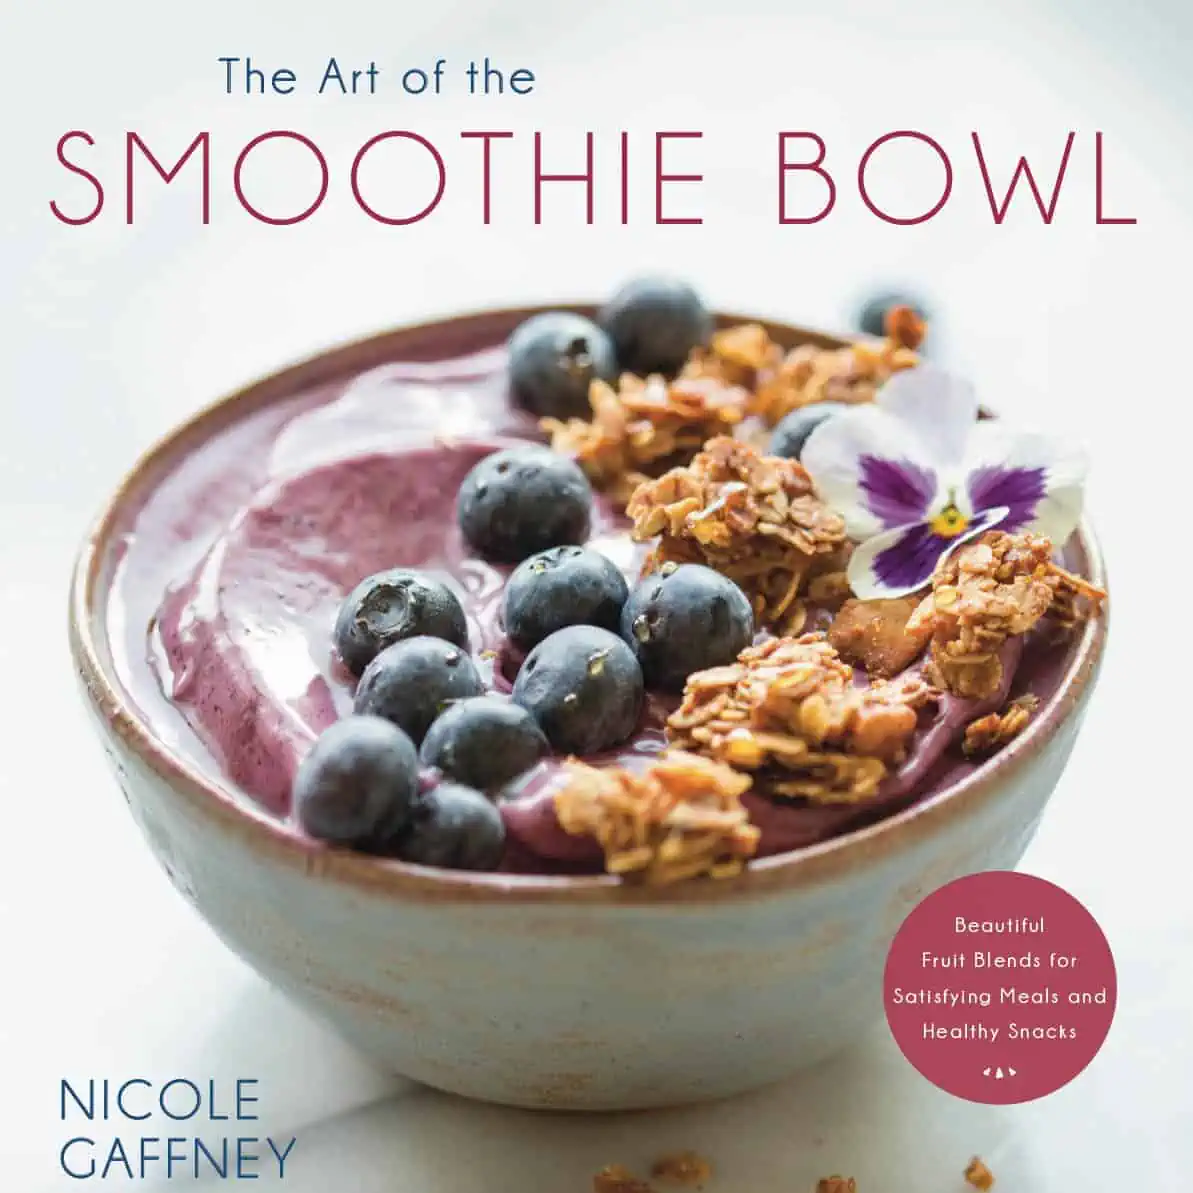 The Art of the Smoothie Bowl by Nicole Gaffney